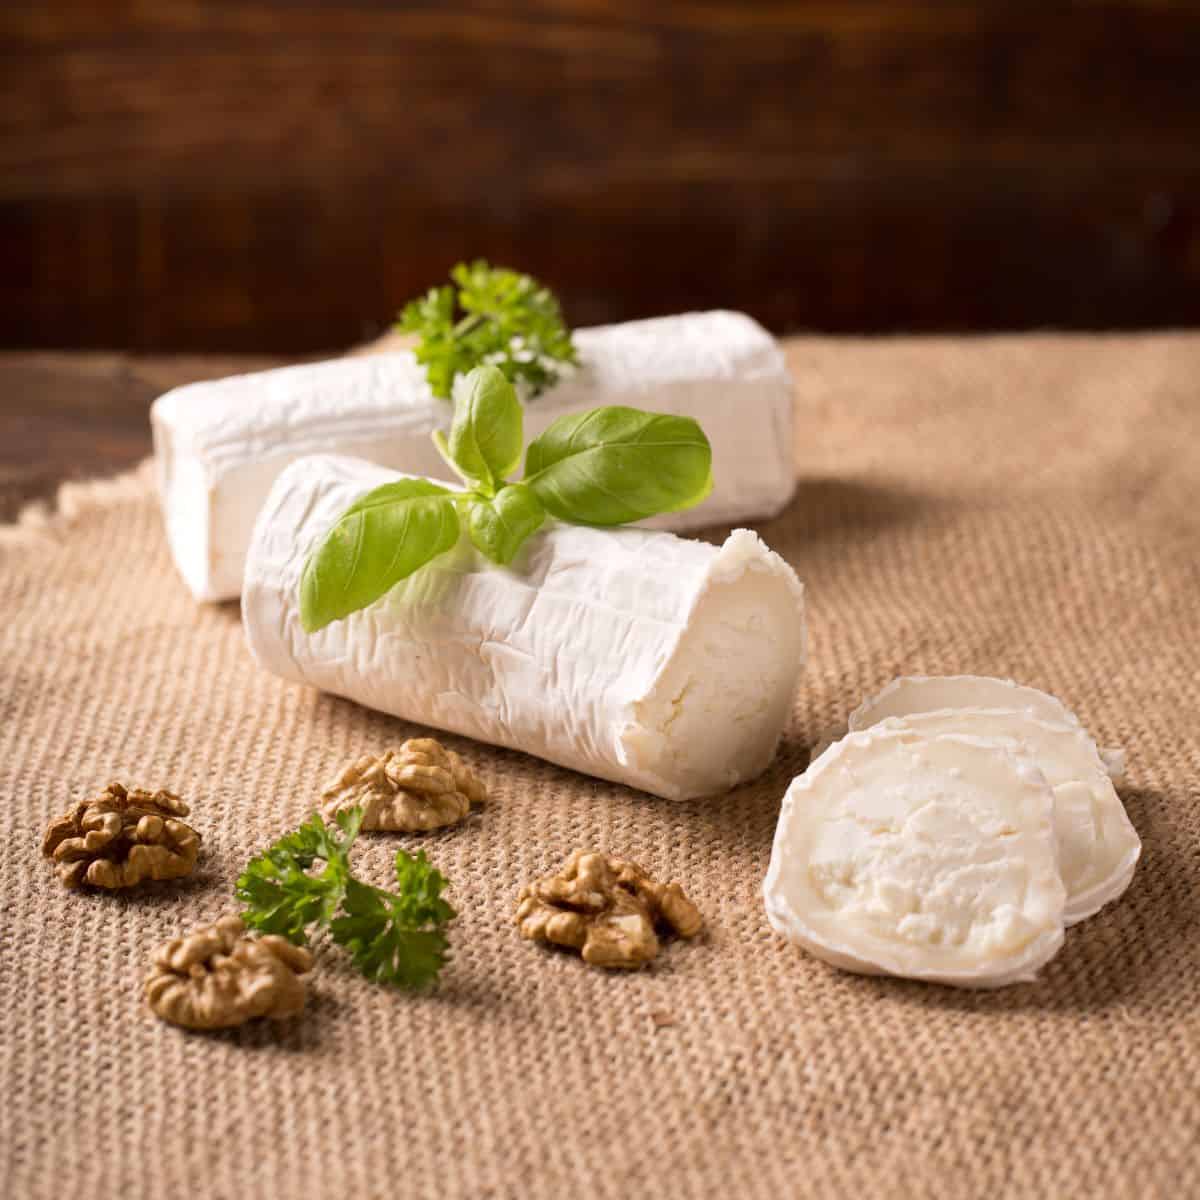 goat's cheese substitutes featured.